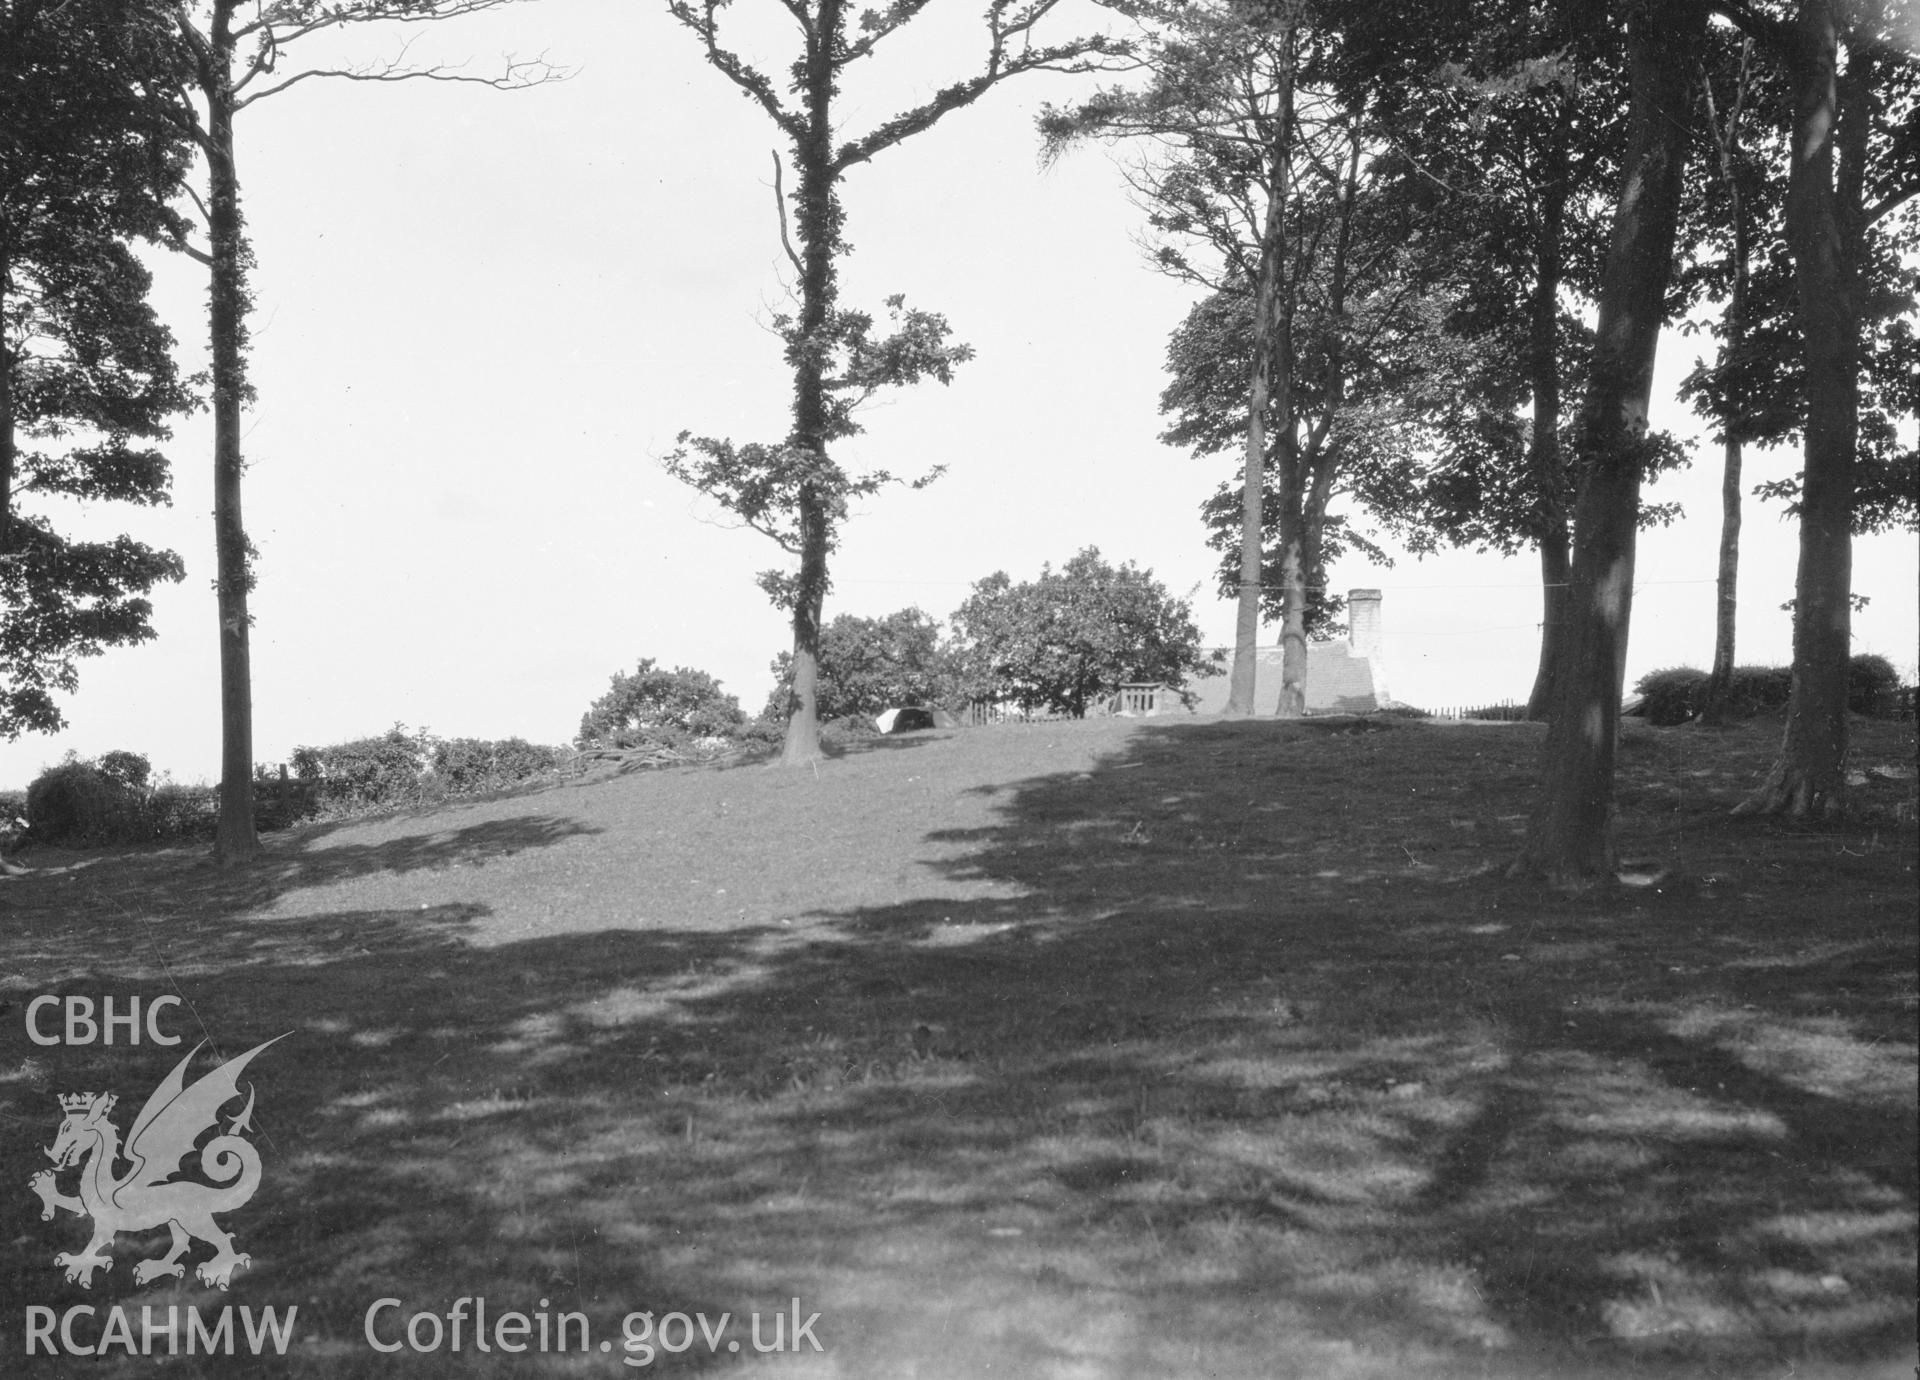 Digital copy of a nitrate negative showing Bryn Digrif Barrows. Transcript of the reverse of the printed photograph: 'Flint 268 73 Whitford/ Bryn Digrif (4) Tumulus.' From the Cadw Monuments in Care Collection.